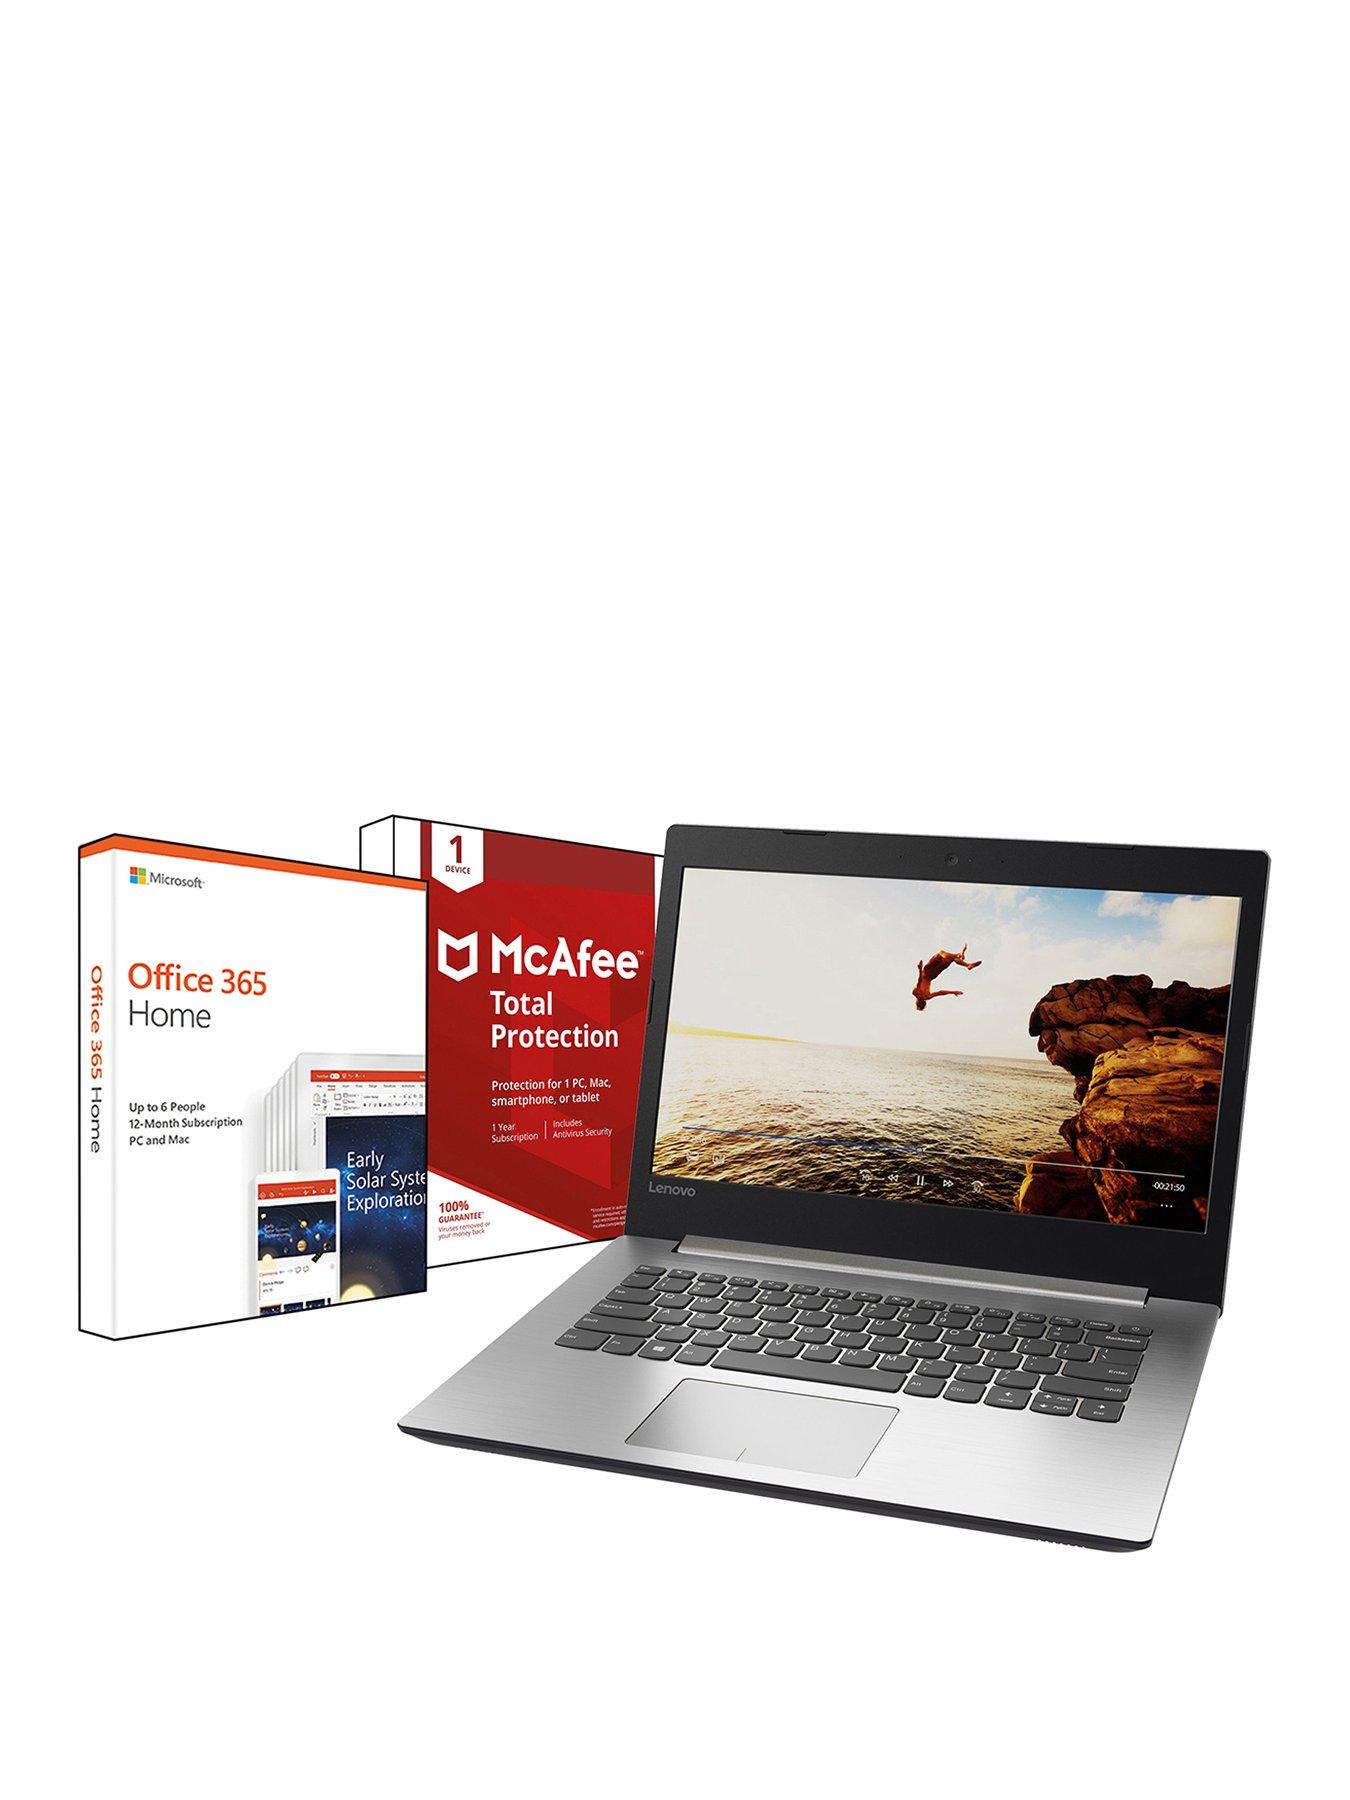 Lenovo Ideapad 320 Intel&Reg; Core&Trade; I5 Processor, 8Gb Ram, 128Gb Ssd, 14 Inch Laptop Platinum With Microsoft Office 365 Home 1 Year And Mcafee Total Protection For 1 Device